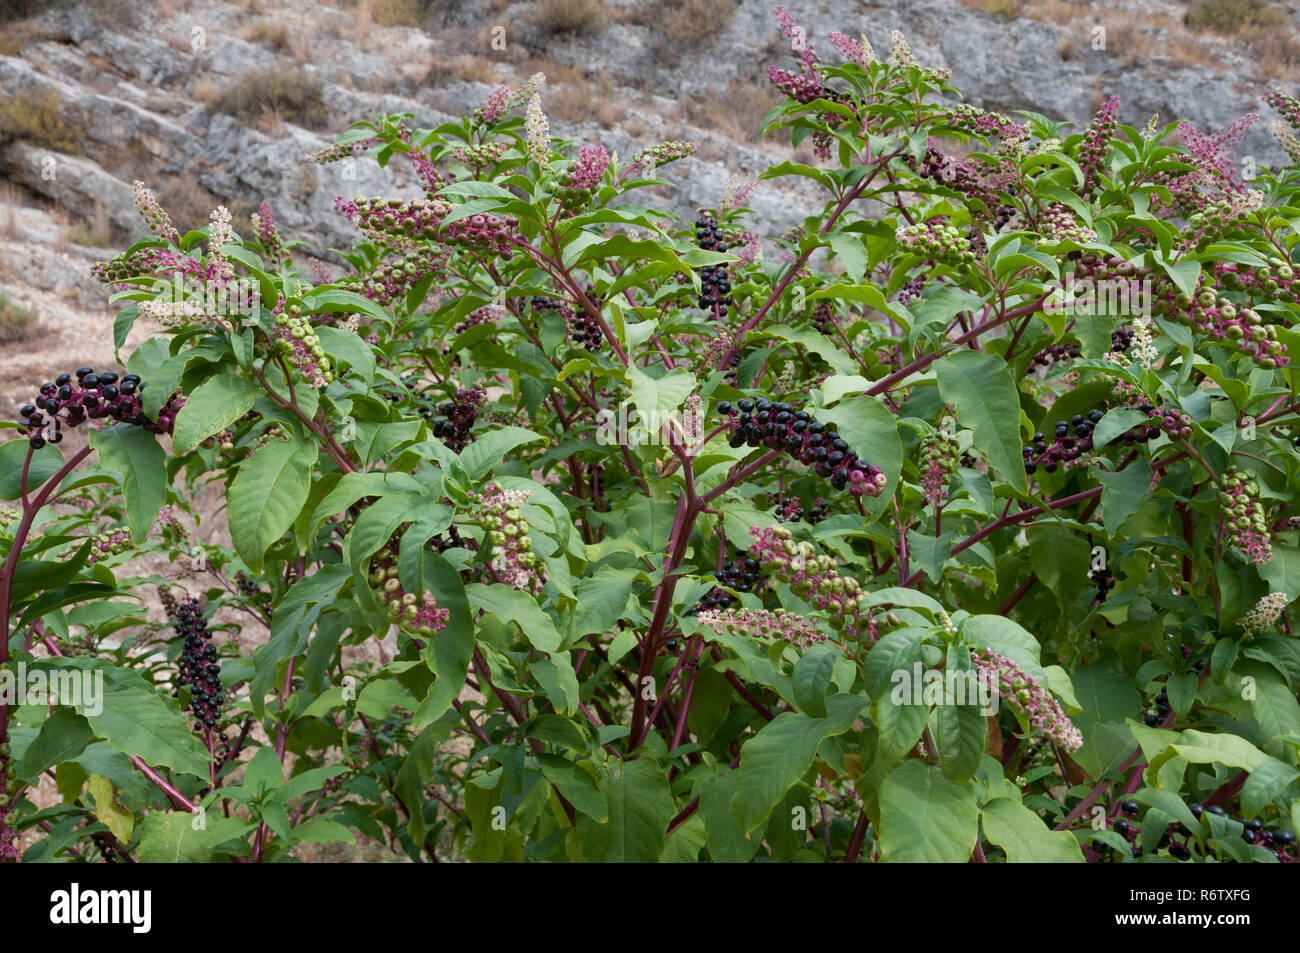 American Pokeweed (Phytolacca americana) an invasive plant species growing in southern Europe, Spain Stock Photo